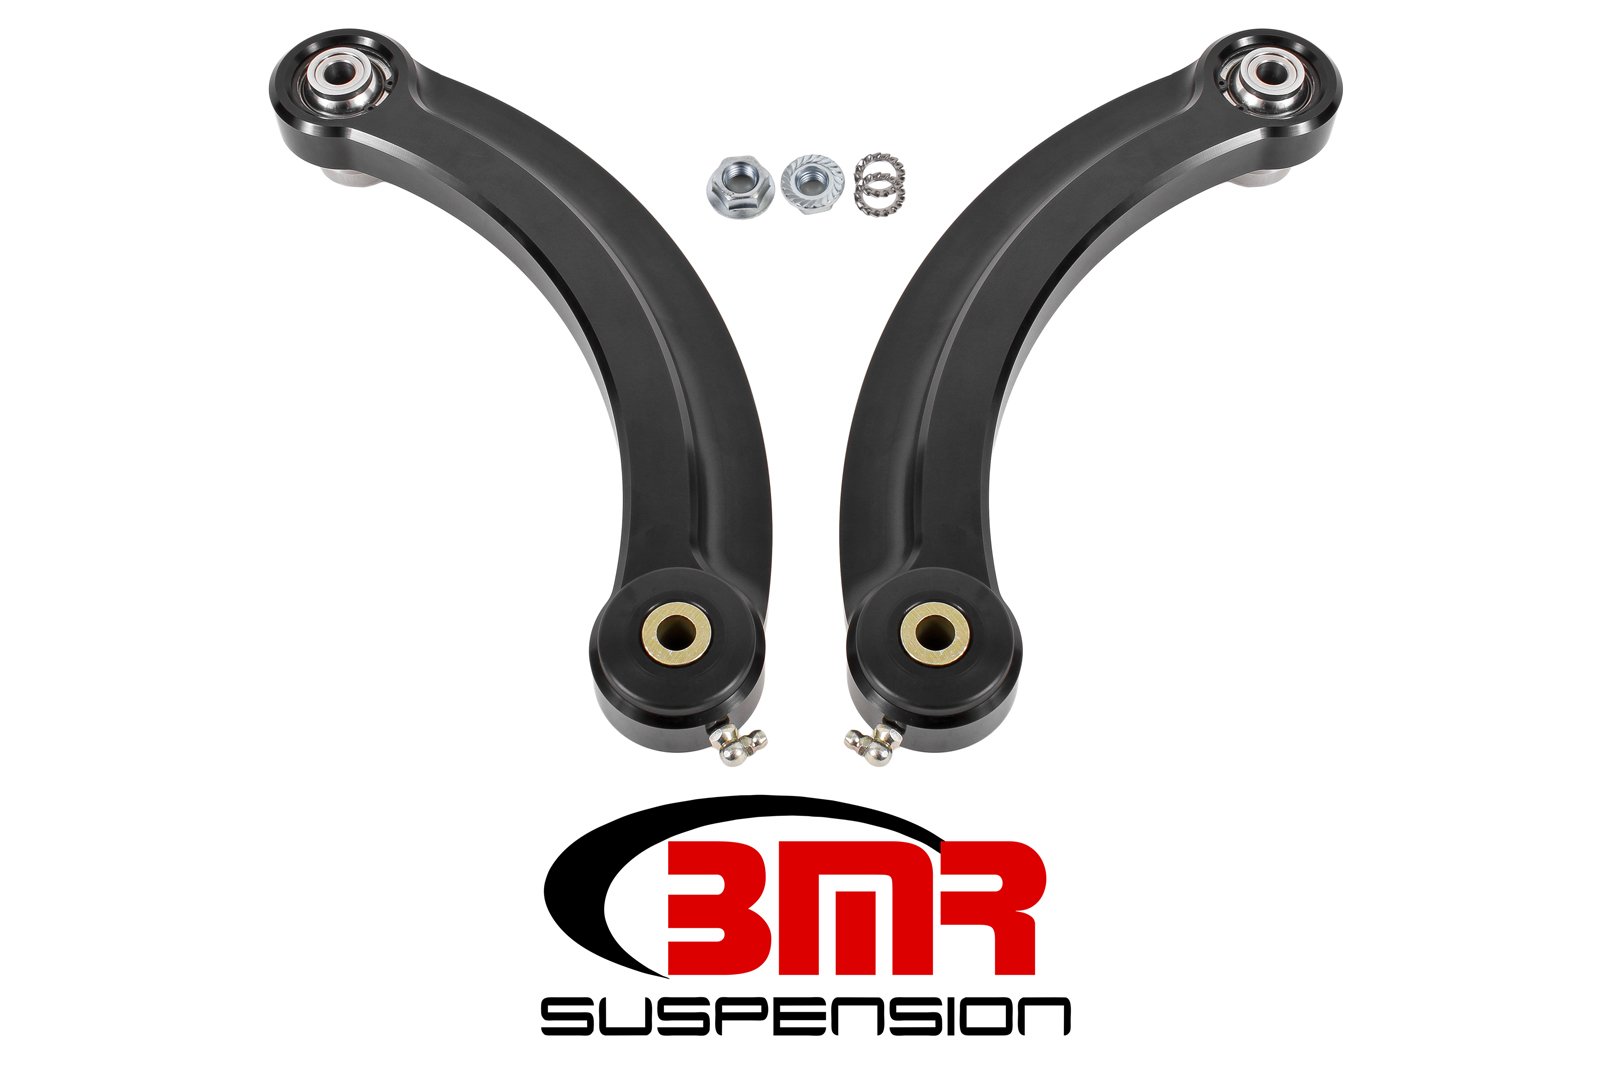 Camber Link, Fixed, Delrin/Bearing, Billet Aluminum, Fits all 2015-newer Ford Mustang , BMR Suspension - UTCA064